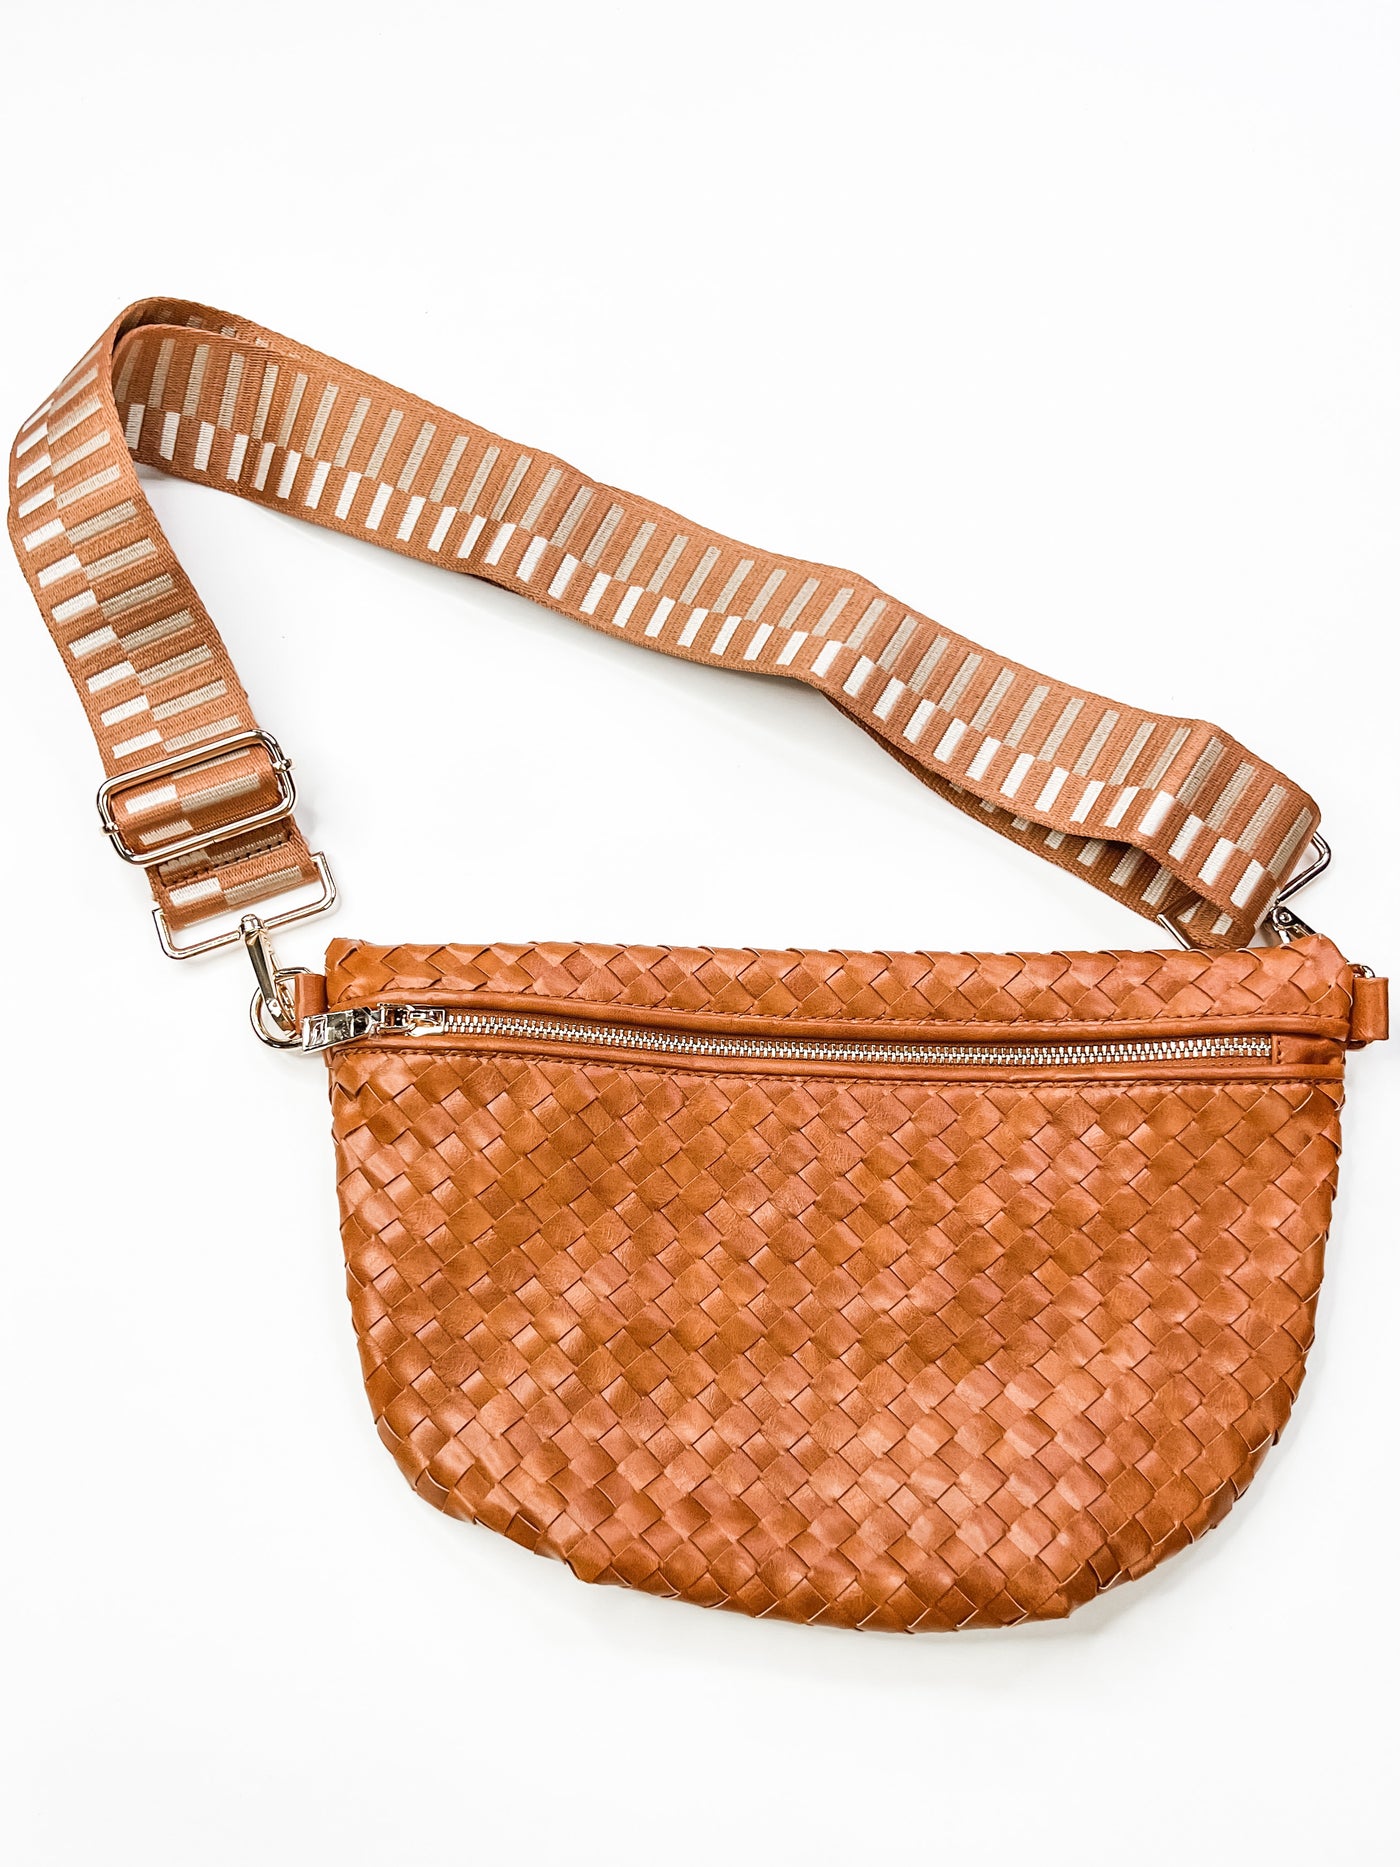 Pretty Simple Woven Westlyn Bum Bag in Brown - Her Hide Out